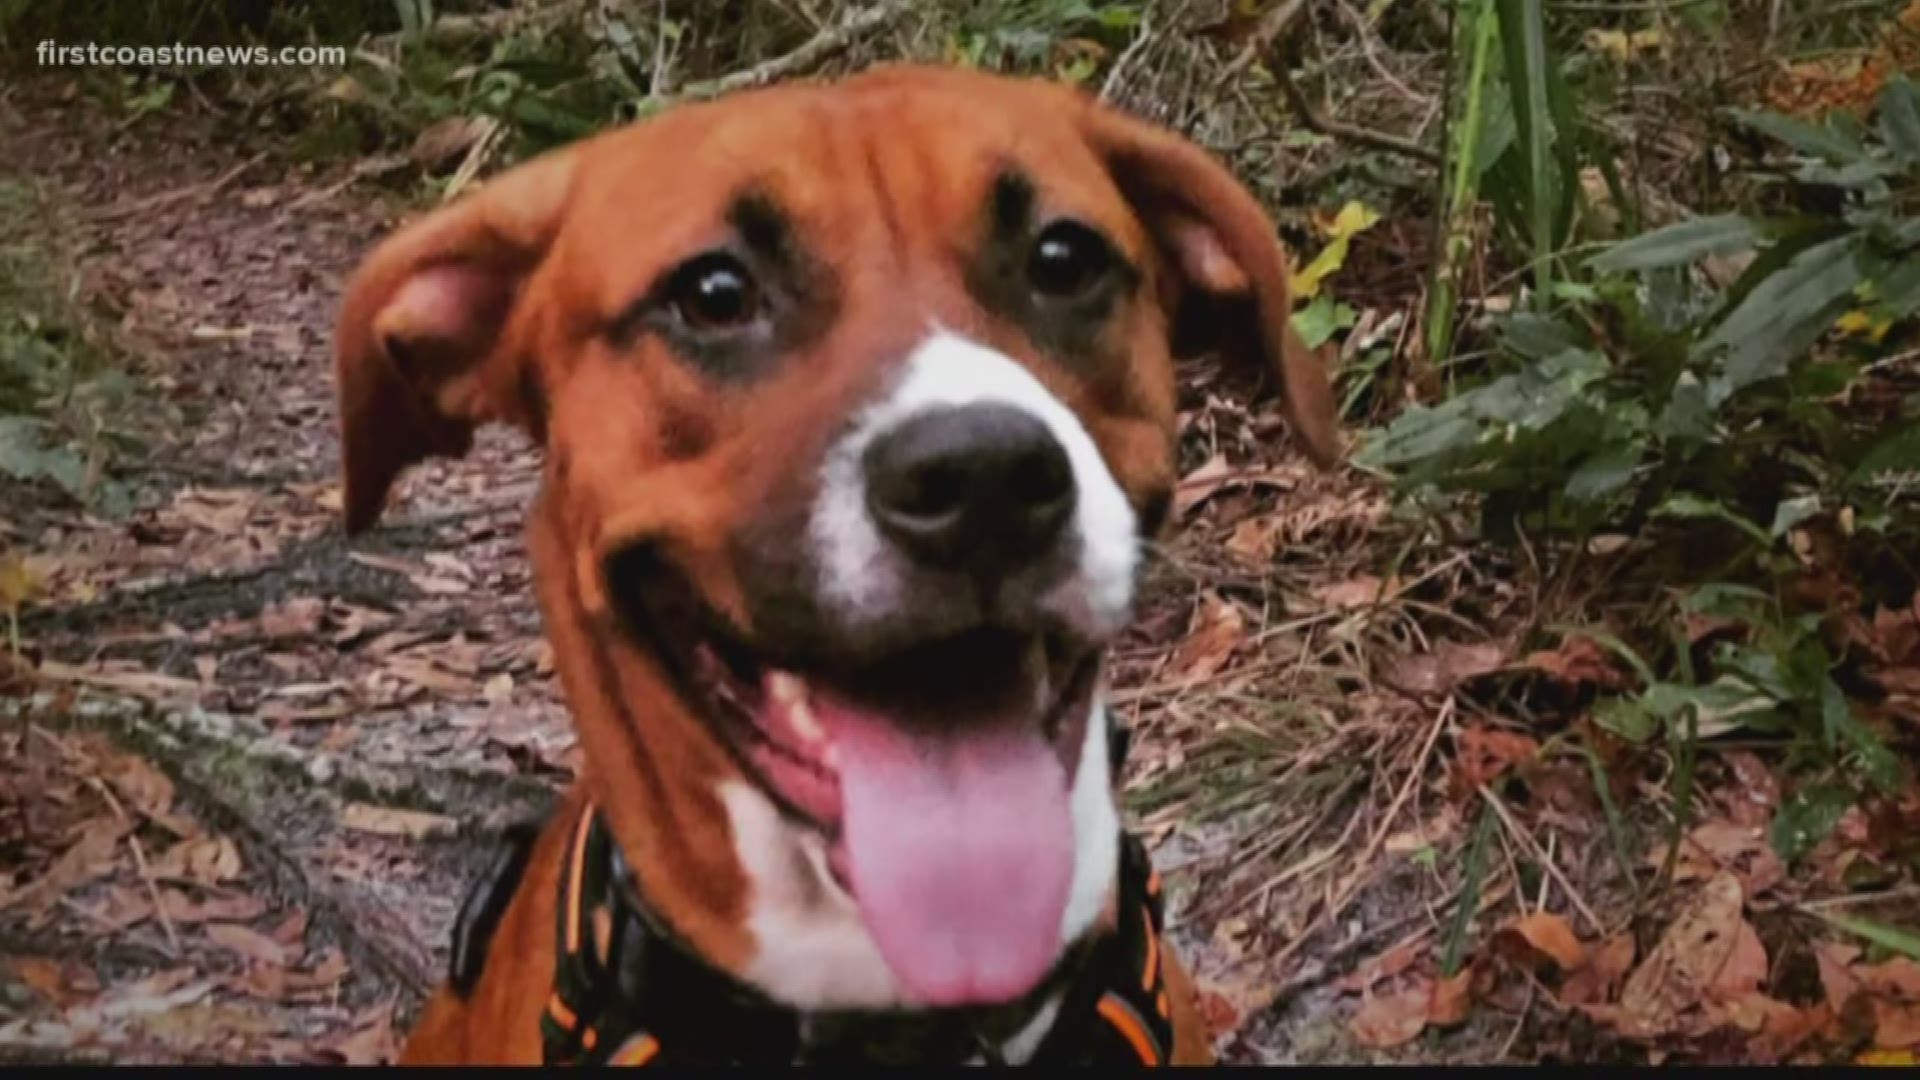 The dog was being walked by a dog sitter, off leash, when the incident occurred. According to a police report, Clay County Sheriff's Lt. Mark Cowan believed Parker was a pit bull. He said the dog was 300 feet away, and off leash when it began “charging at him at a full run.”